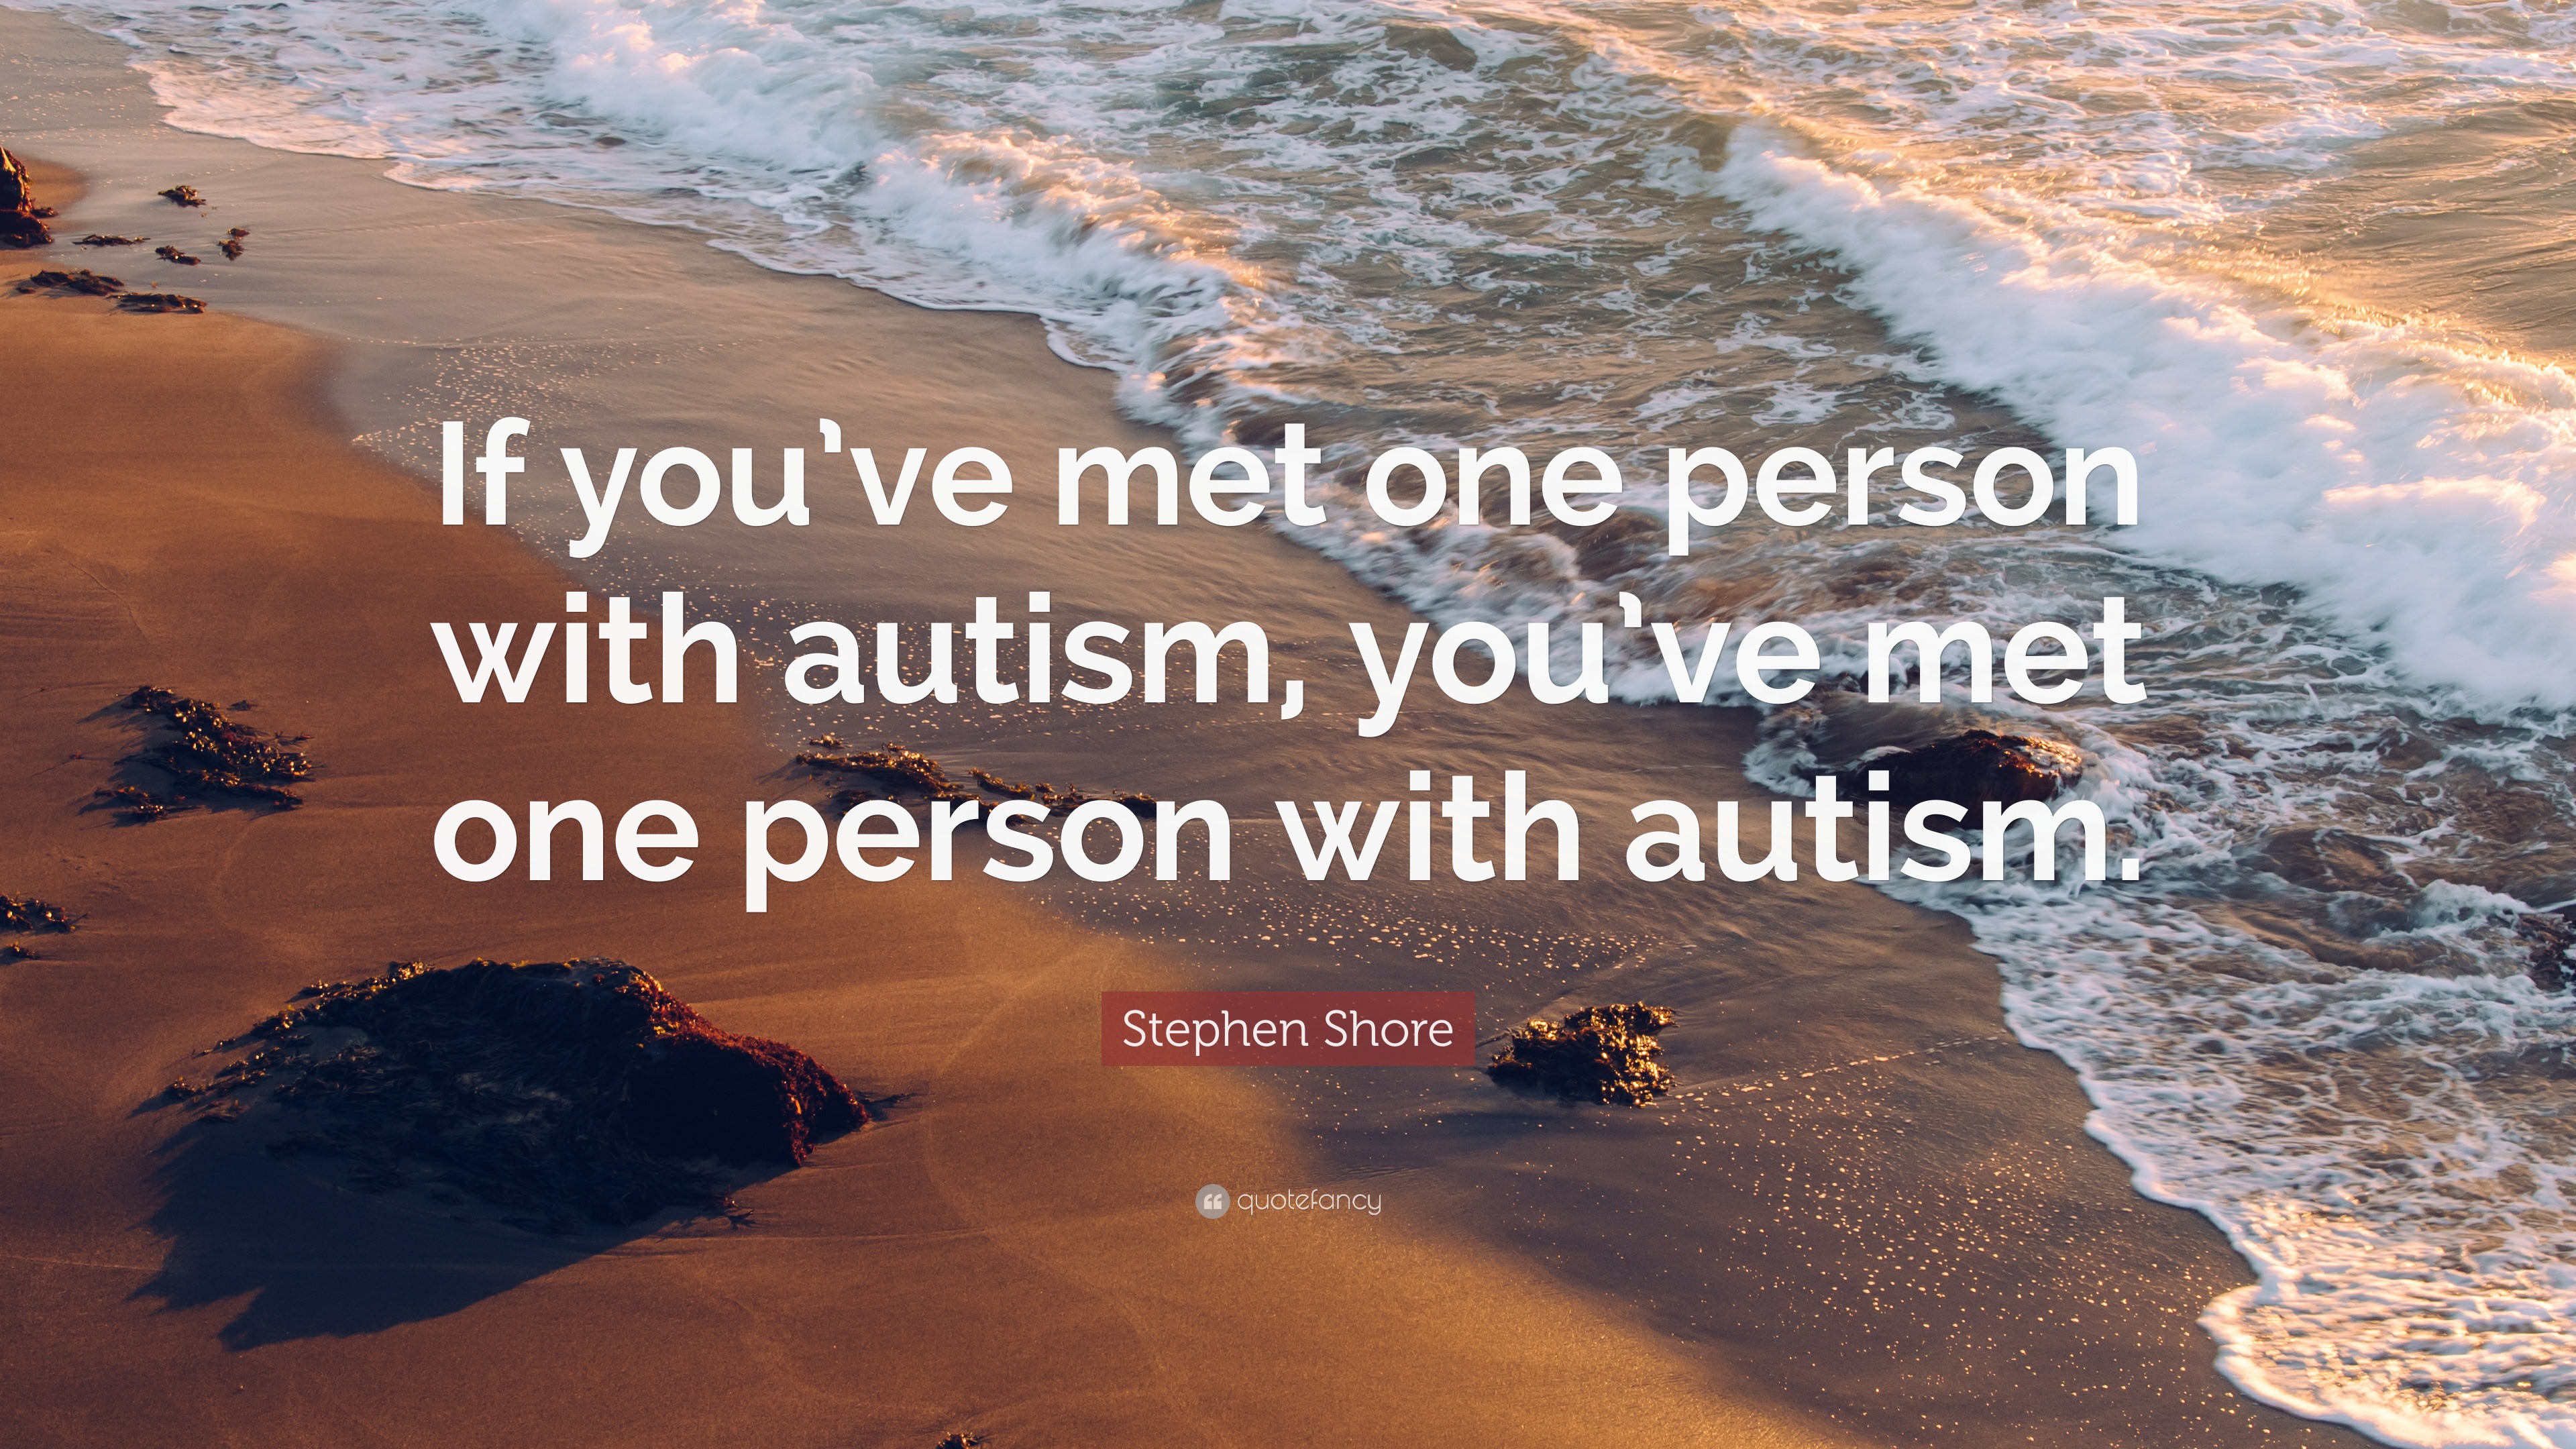 Stephen Shore Quote: “If you’ve met one person with autism, you’ve met ...